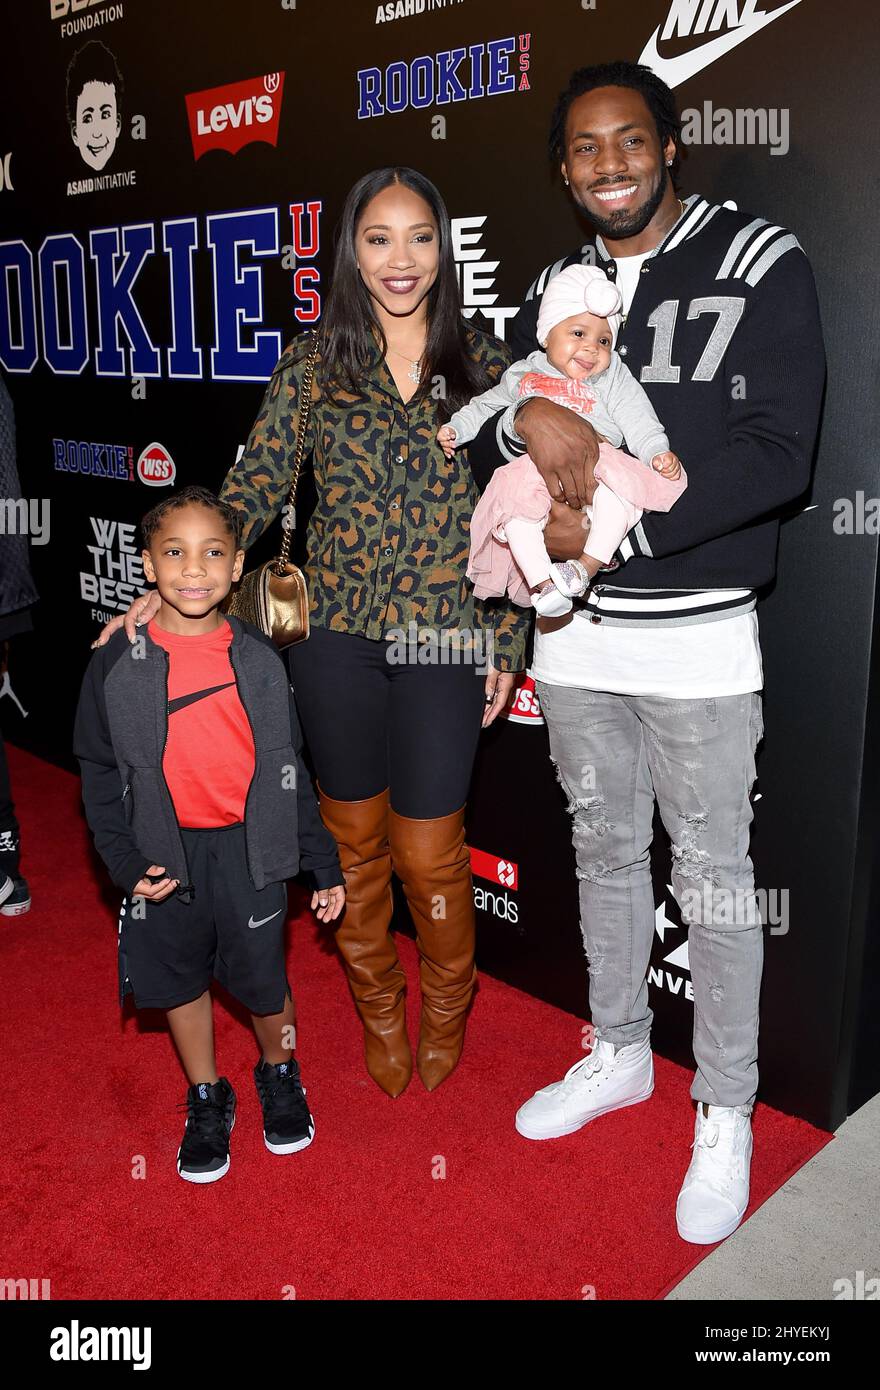 Antonio Cromartie, Terricka Cason at the 2018 Rookie USA Fashion Show held at Milk Studios on February 15, 2018 in Hollywood, CA. Stock Photo